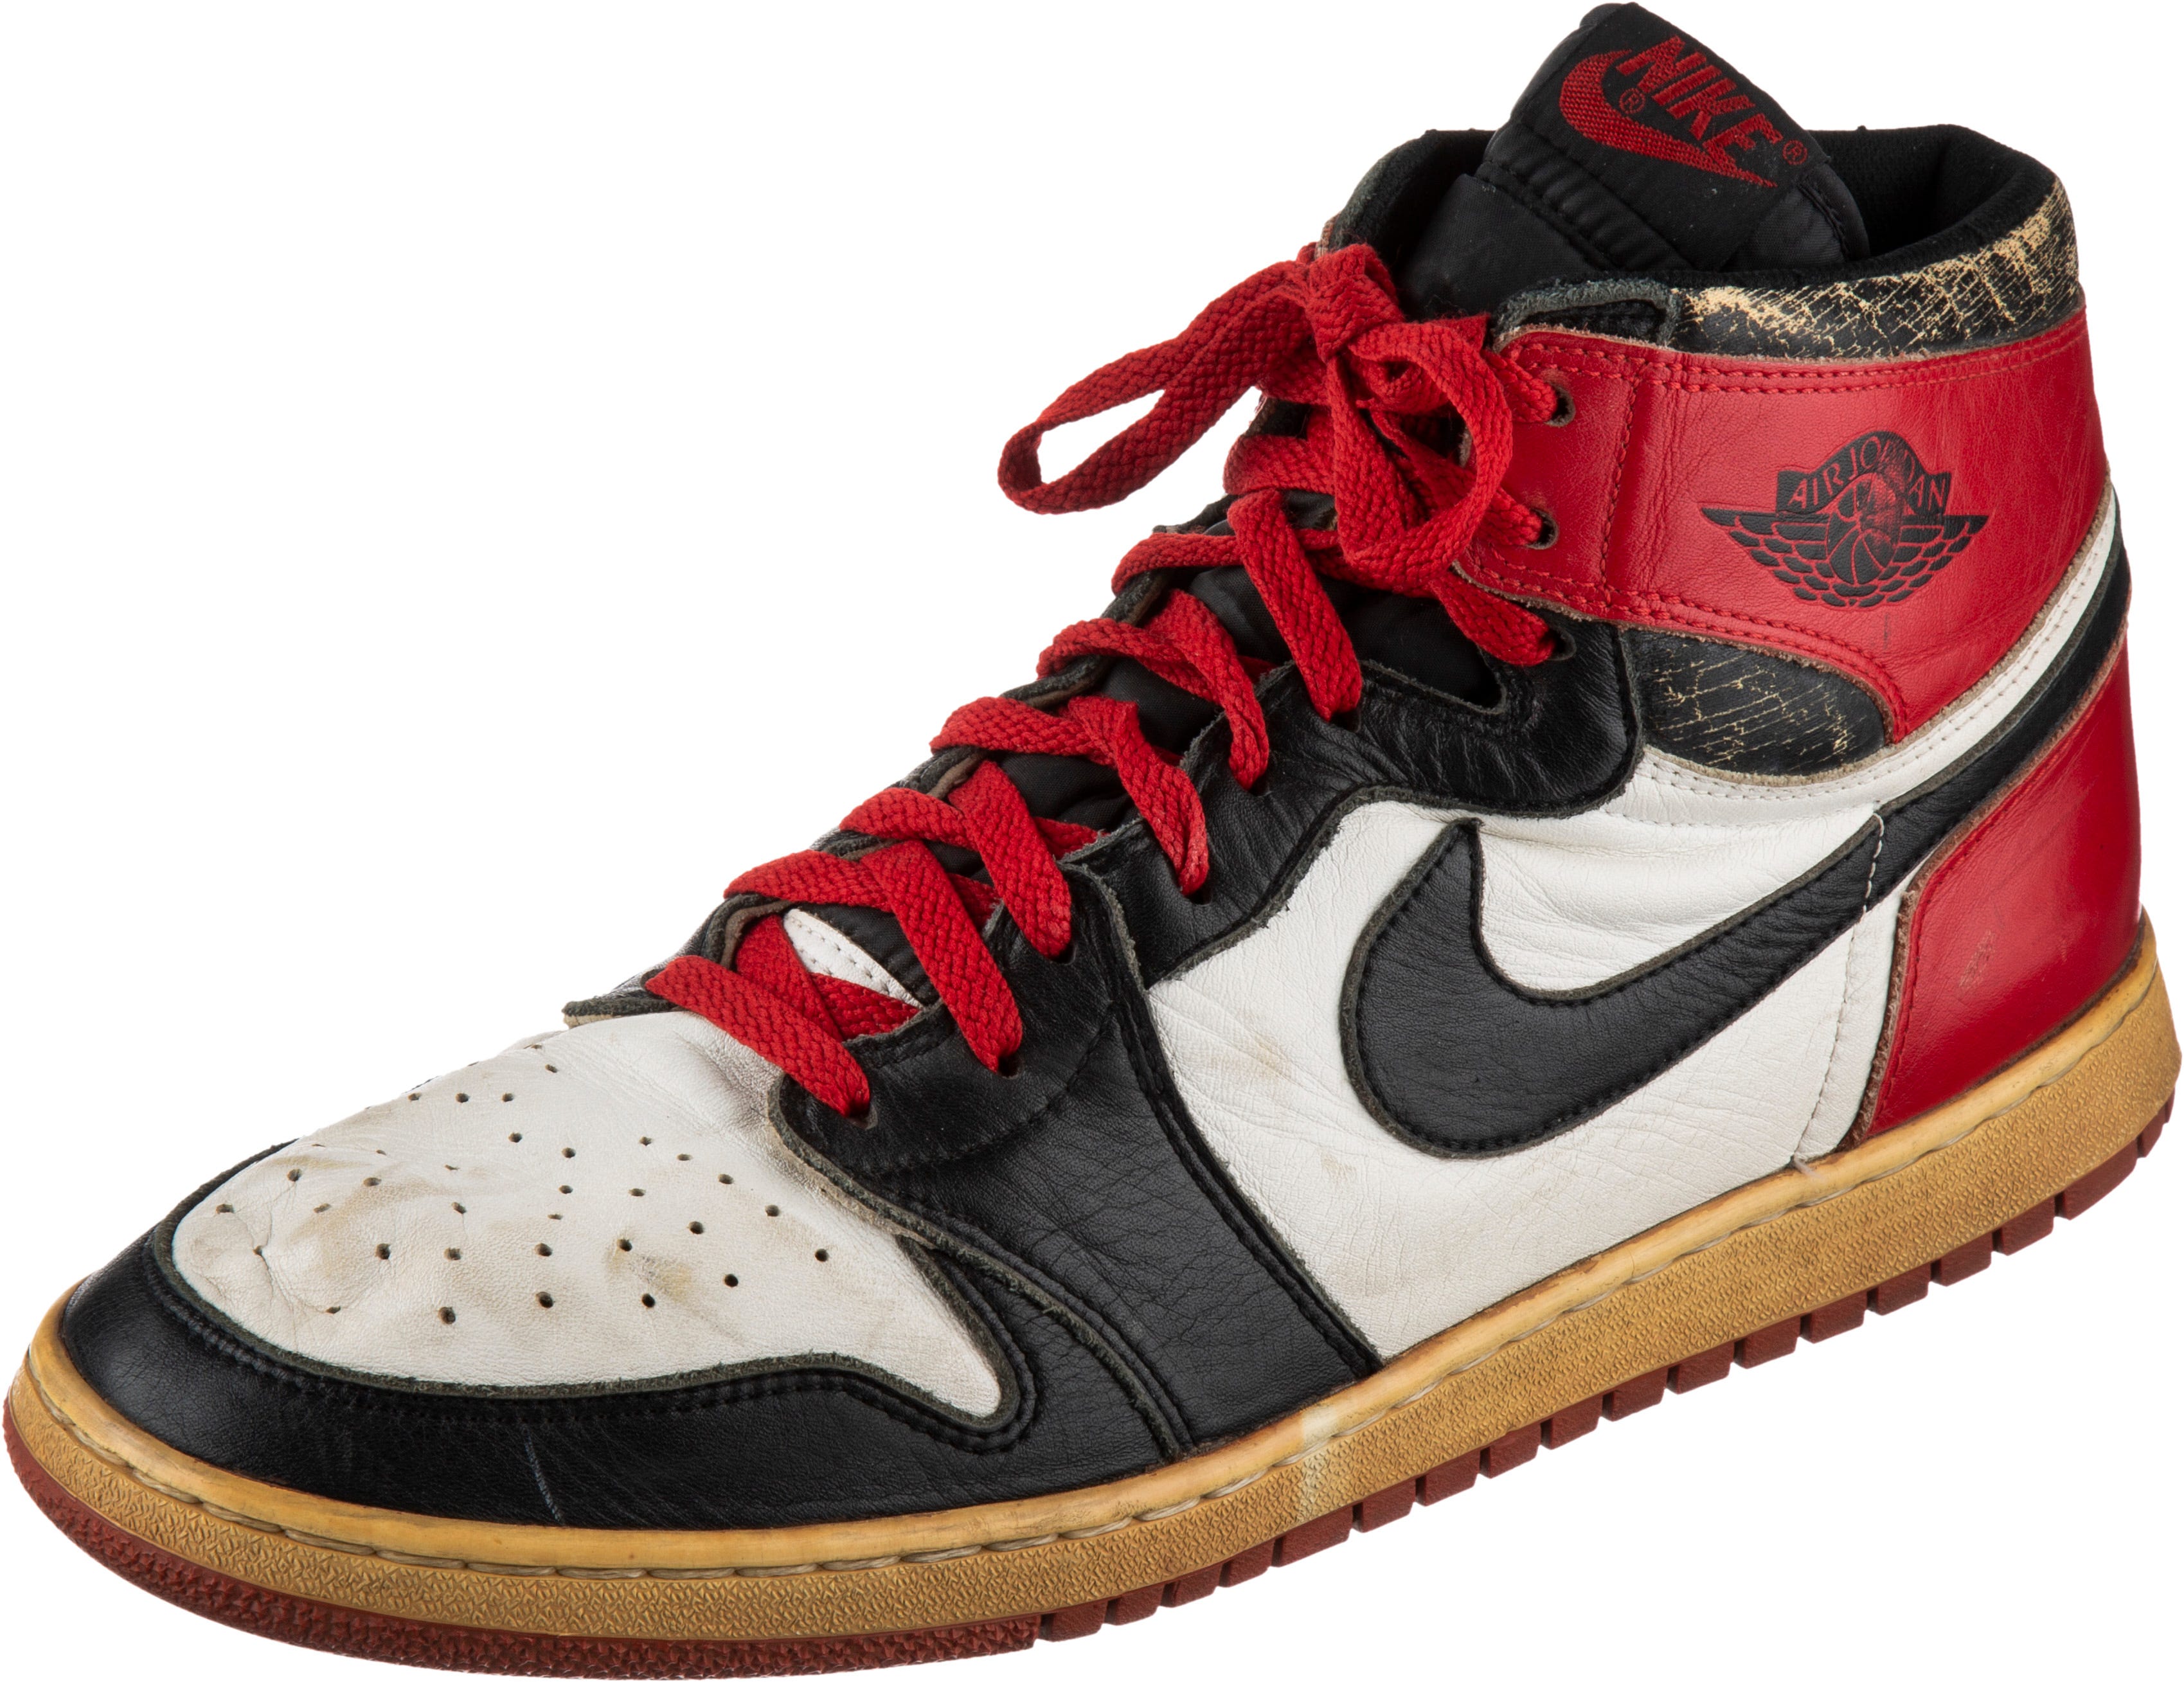 Most significant Air Jordan shoe' saved 